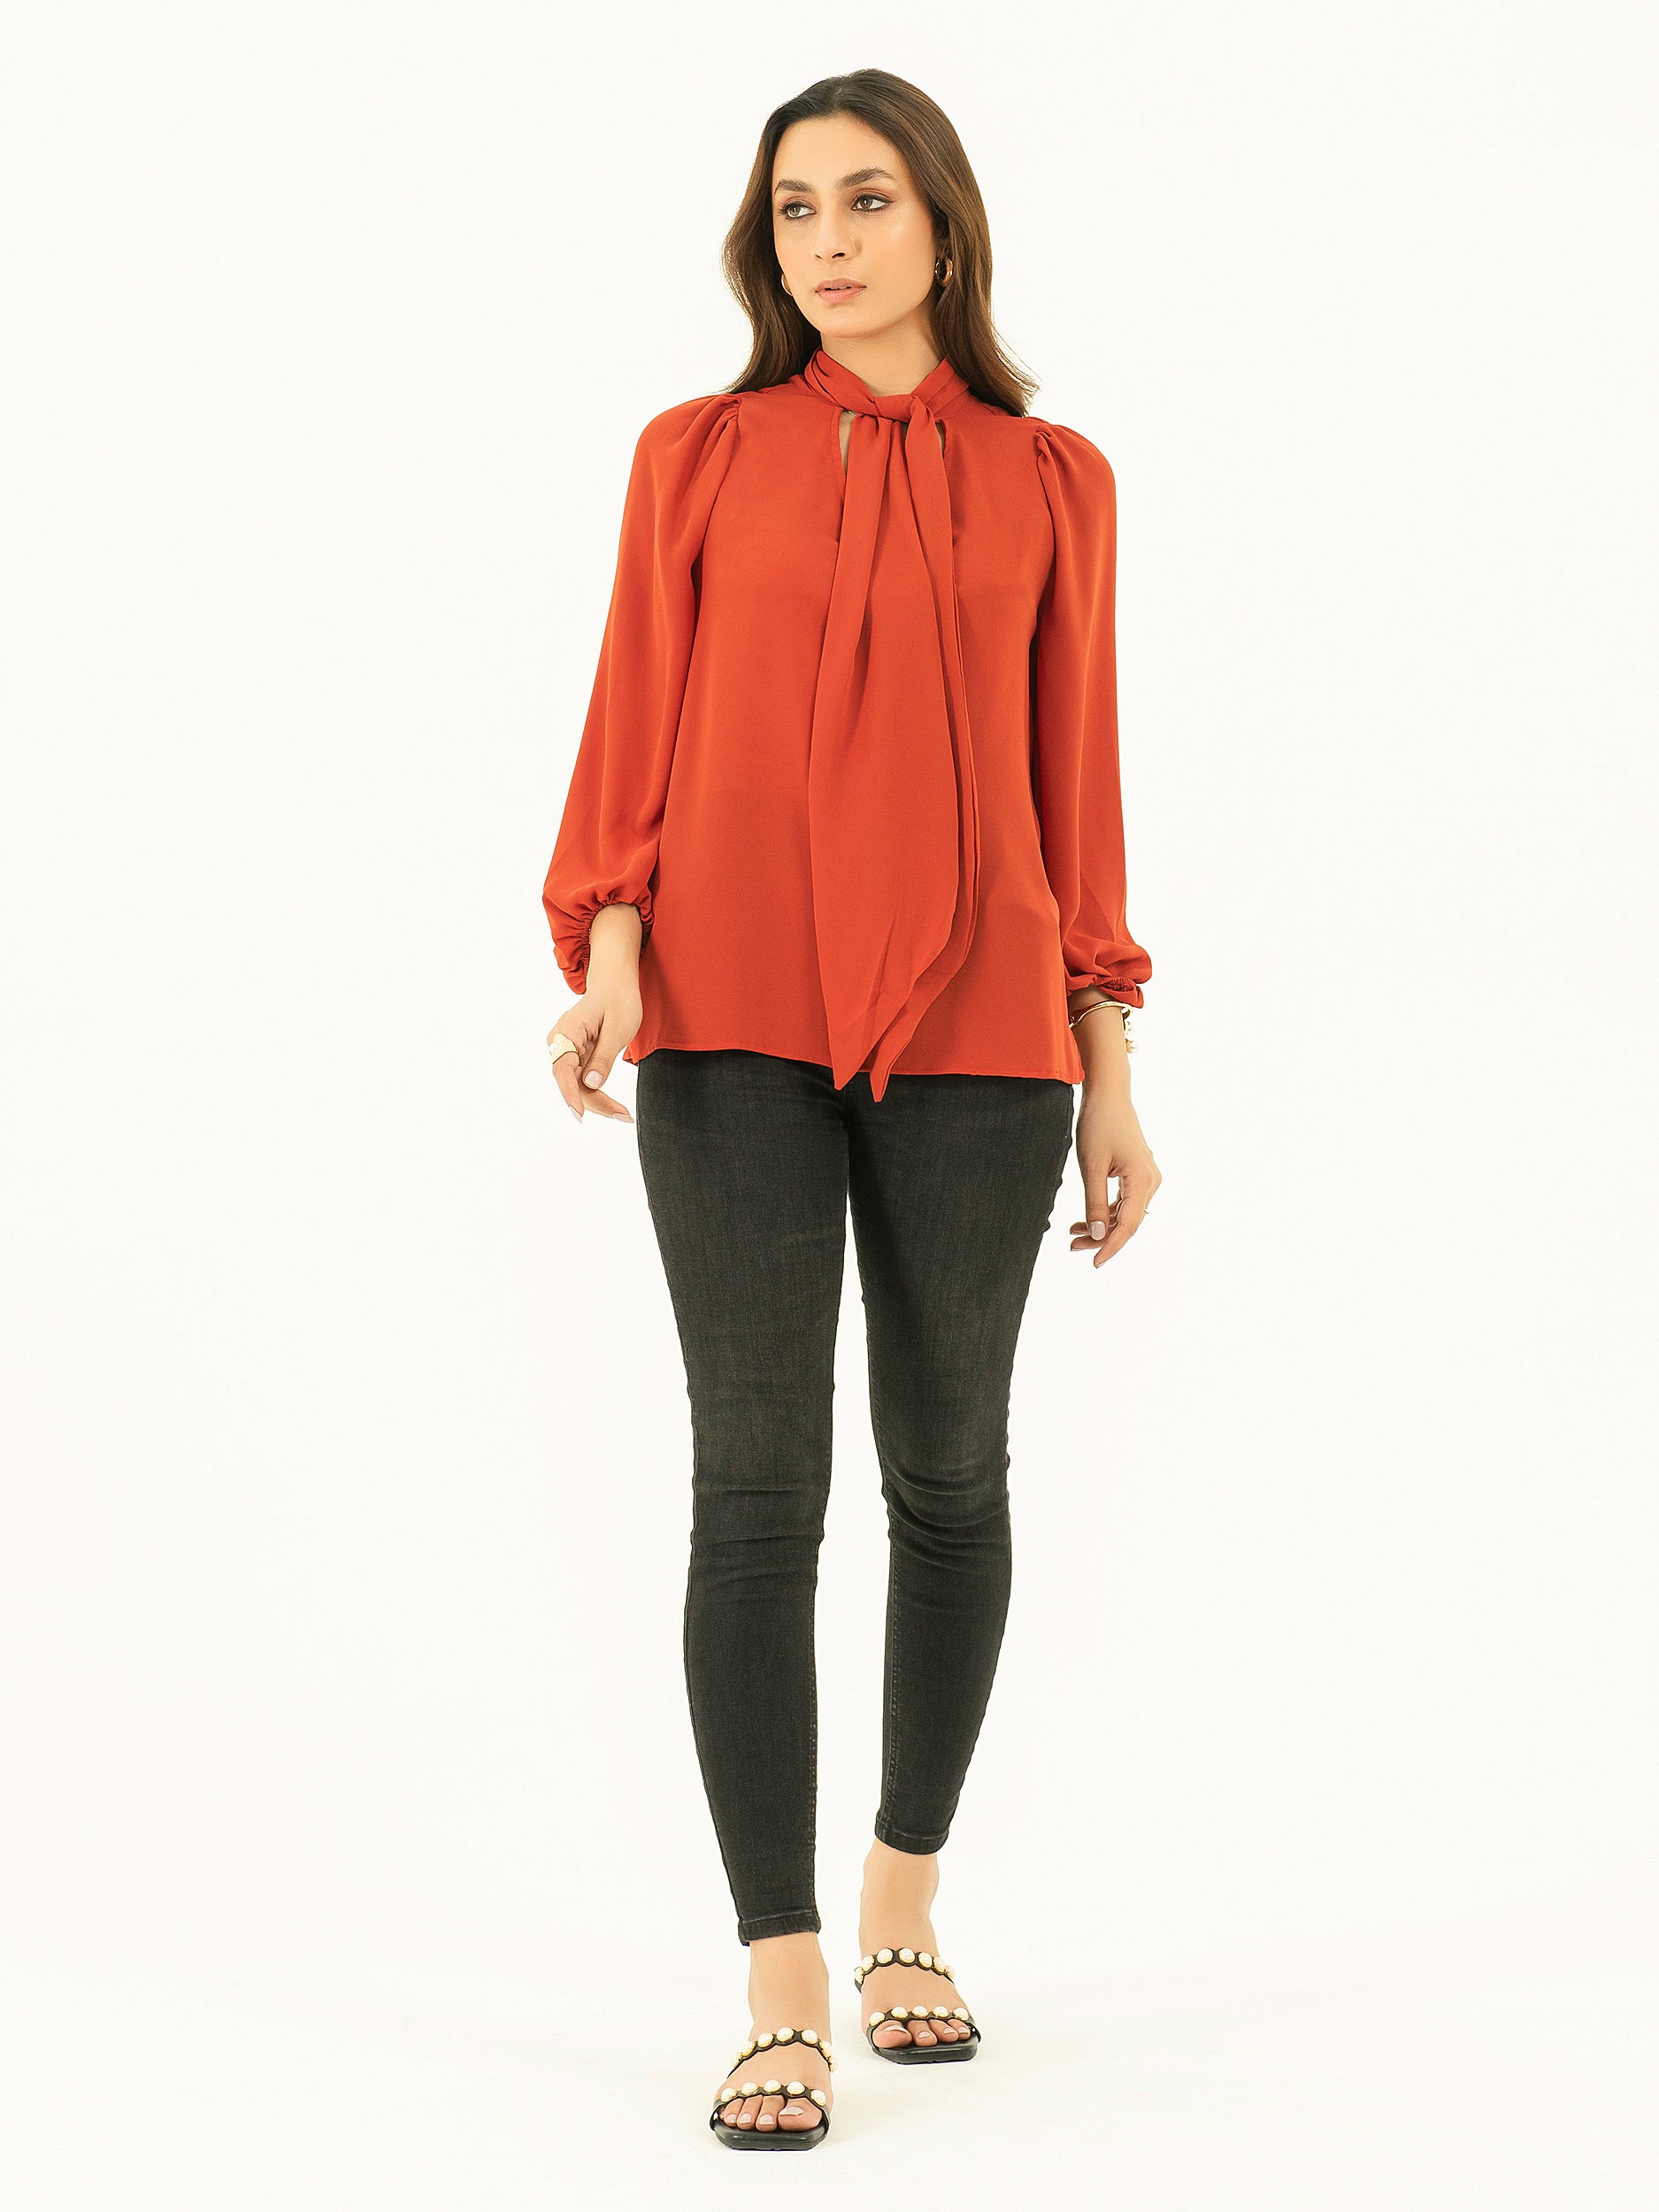 Knotted Top – Limelightpk